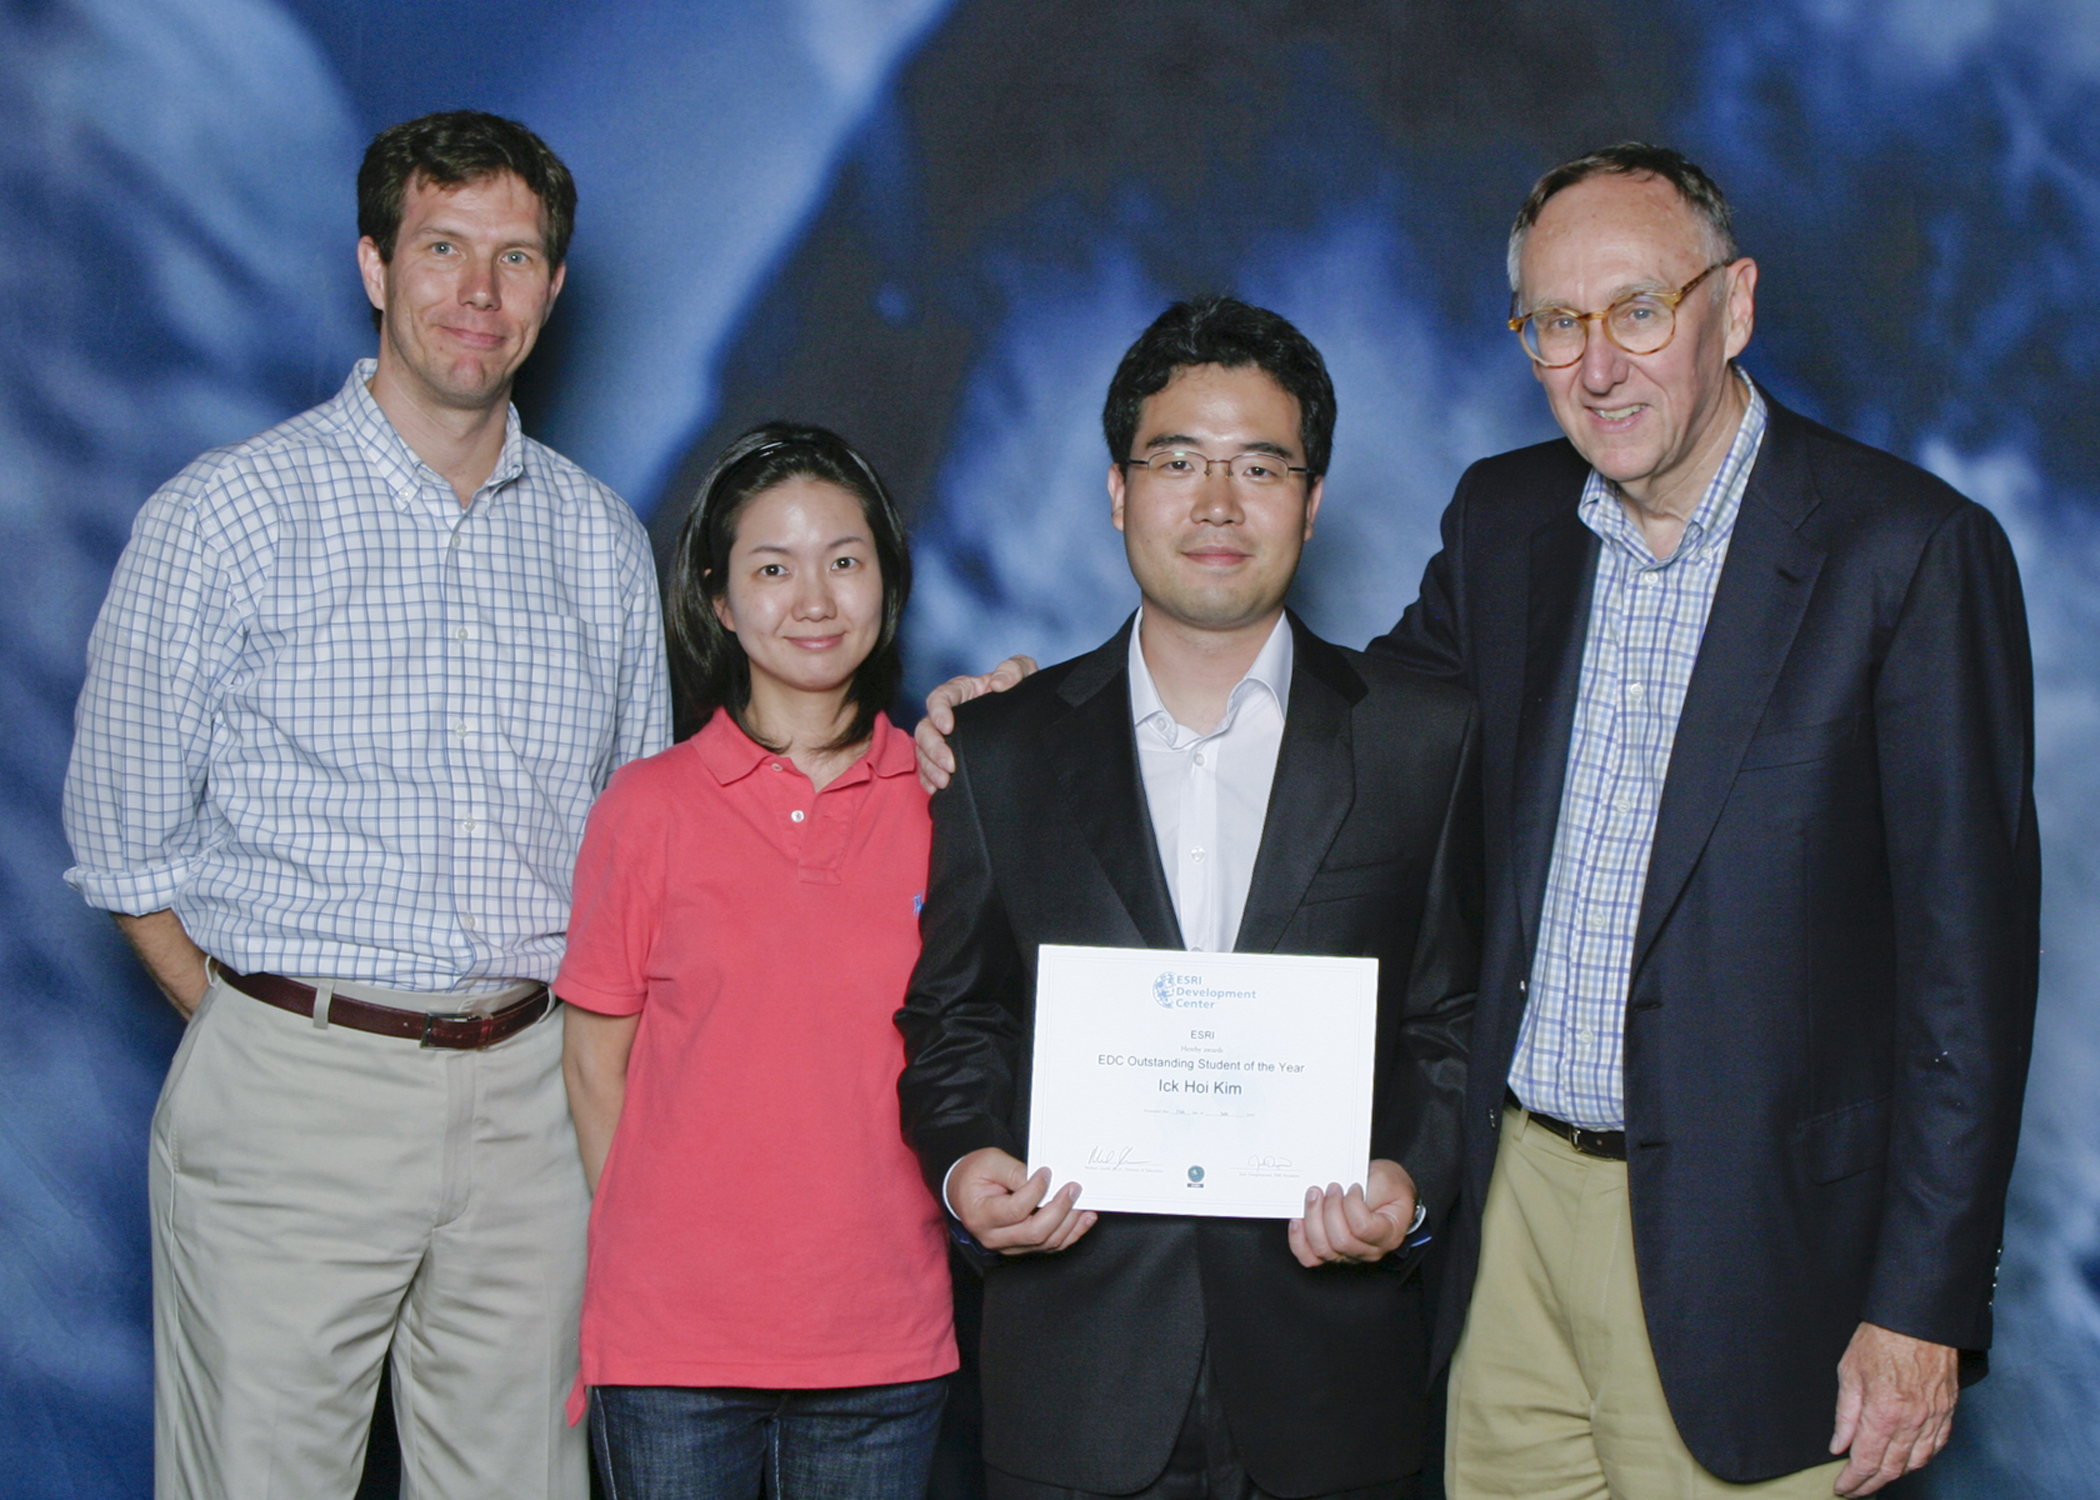 Doctoral student Ick (Rick) Hoi Kim receives two awards.